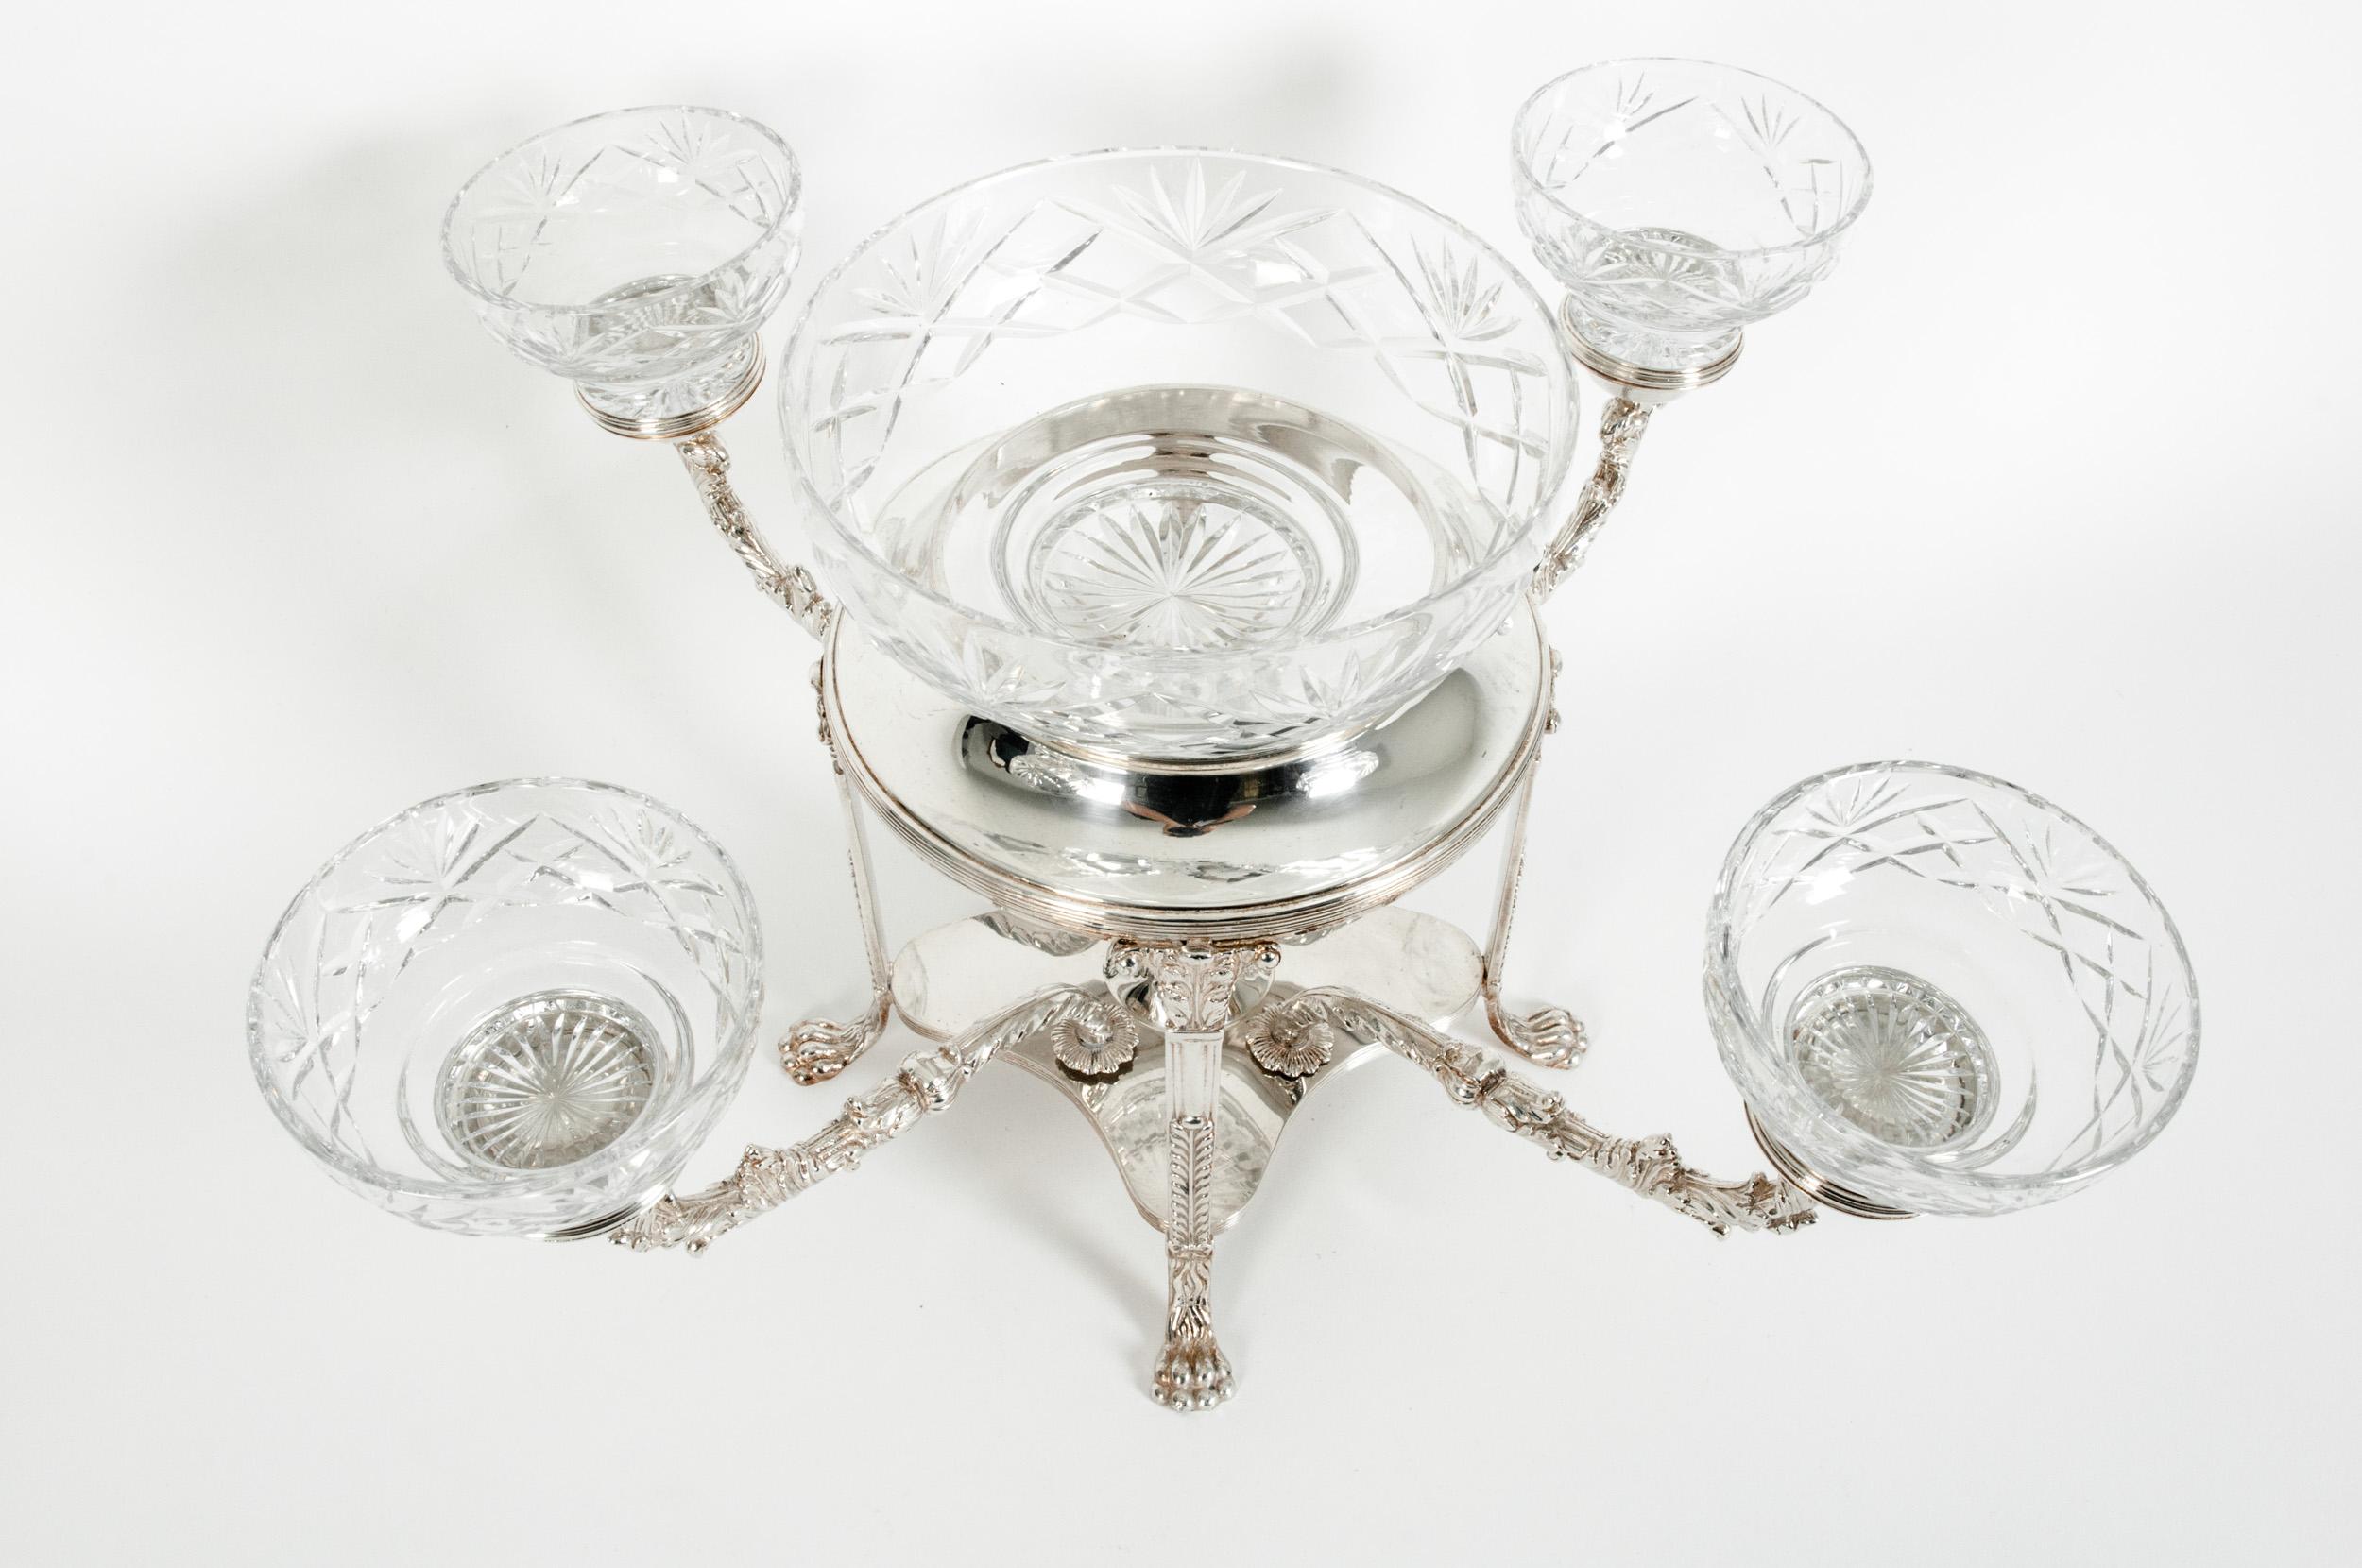 English Plated / Cut Crystal Centerpiece / Epergne 1